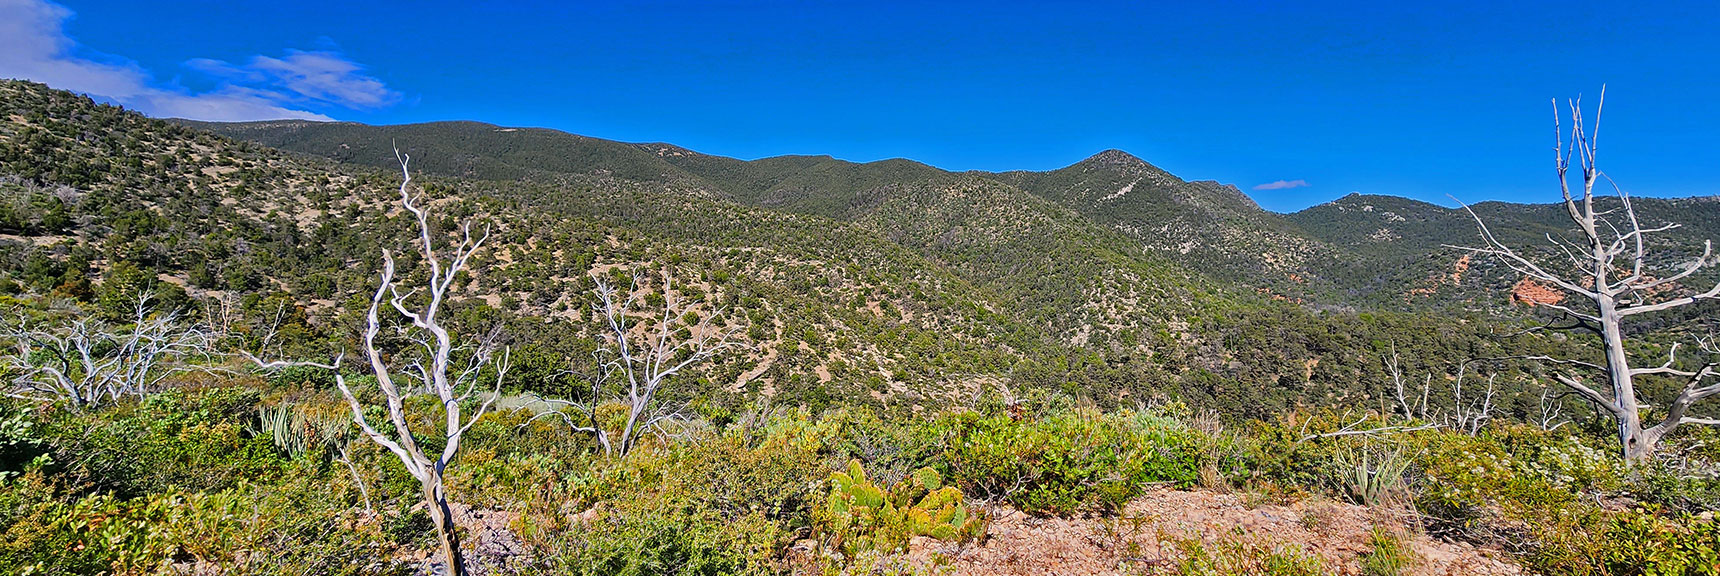 View South Along the Upper Ridgeline | Wilson Ridge South High Point | Lovell Canyon, Nevada